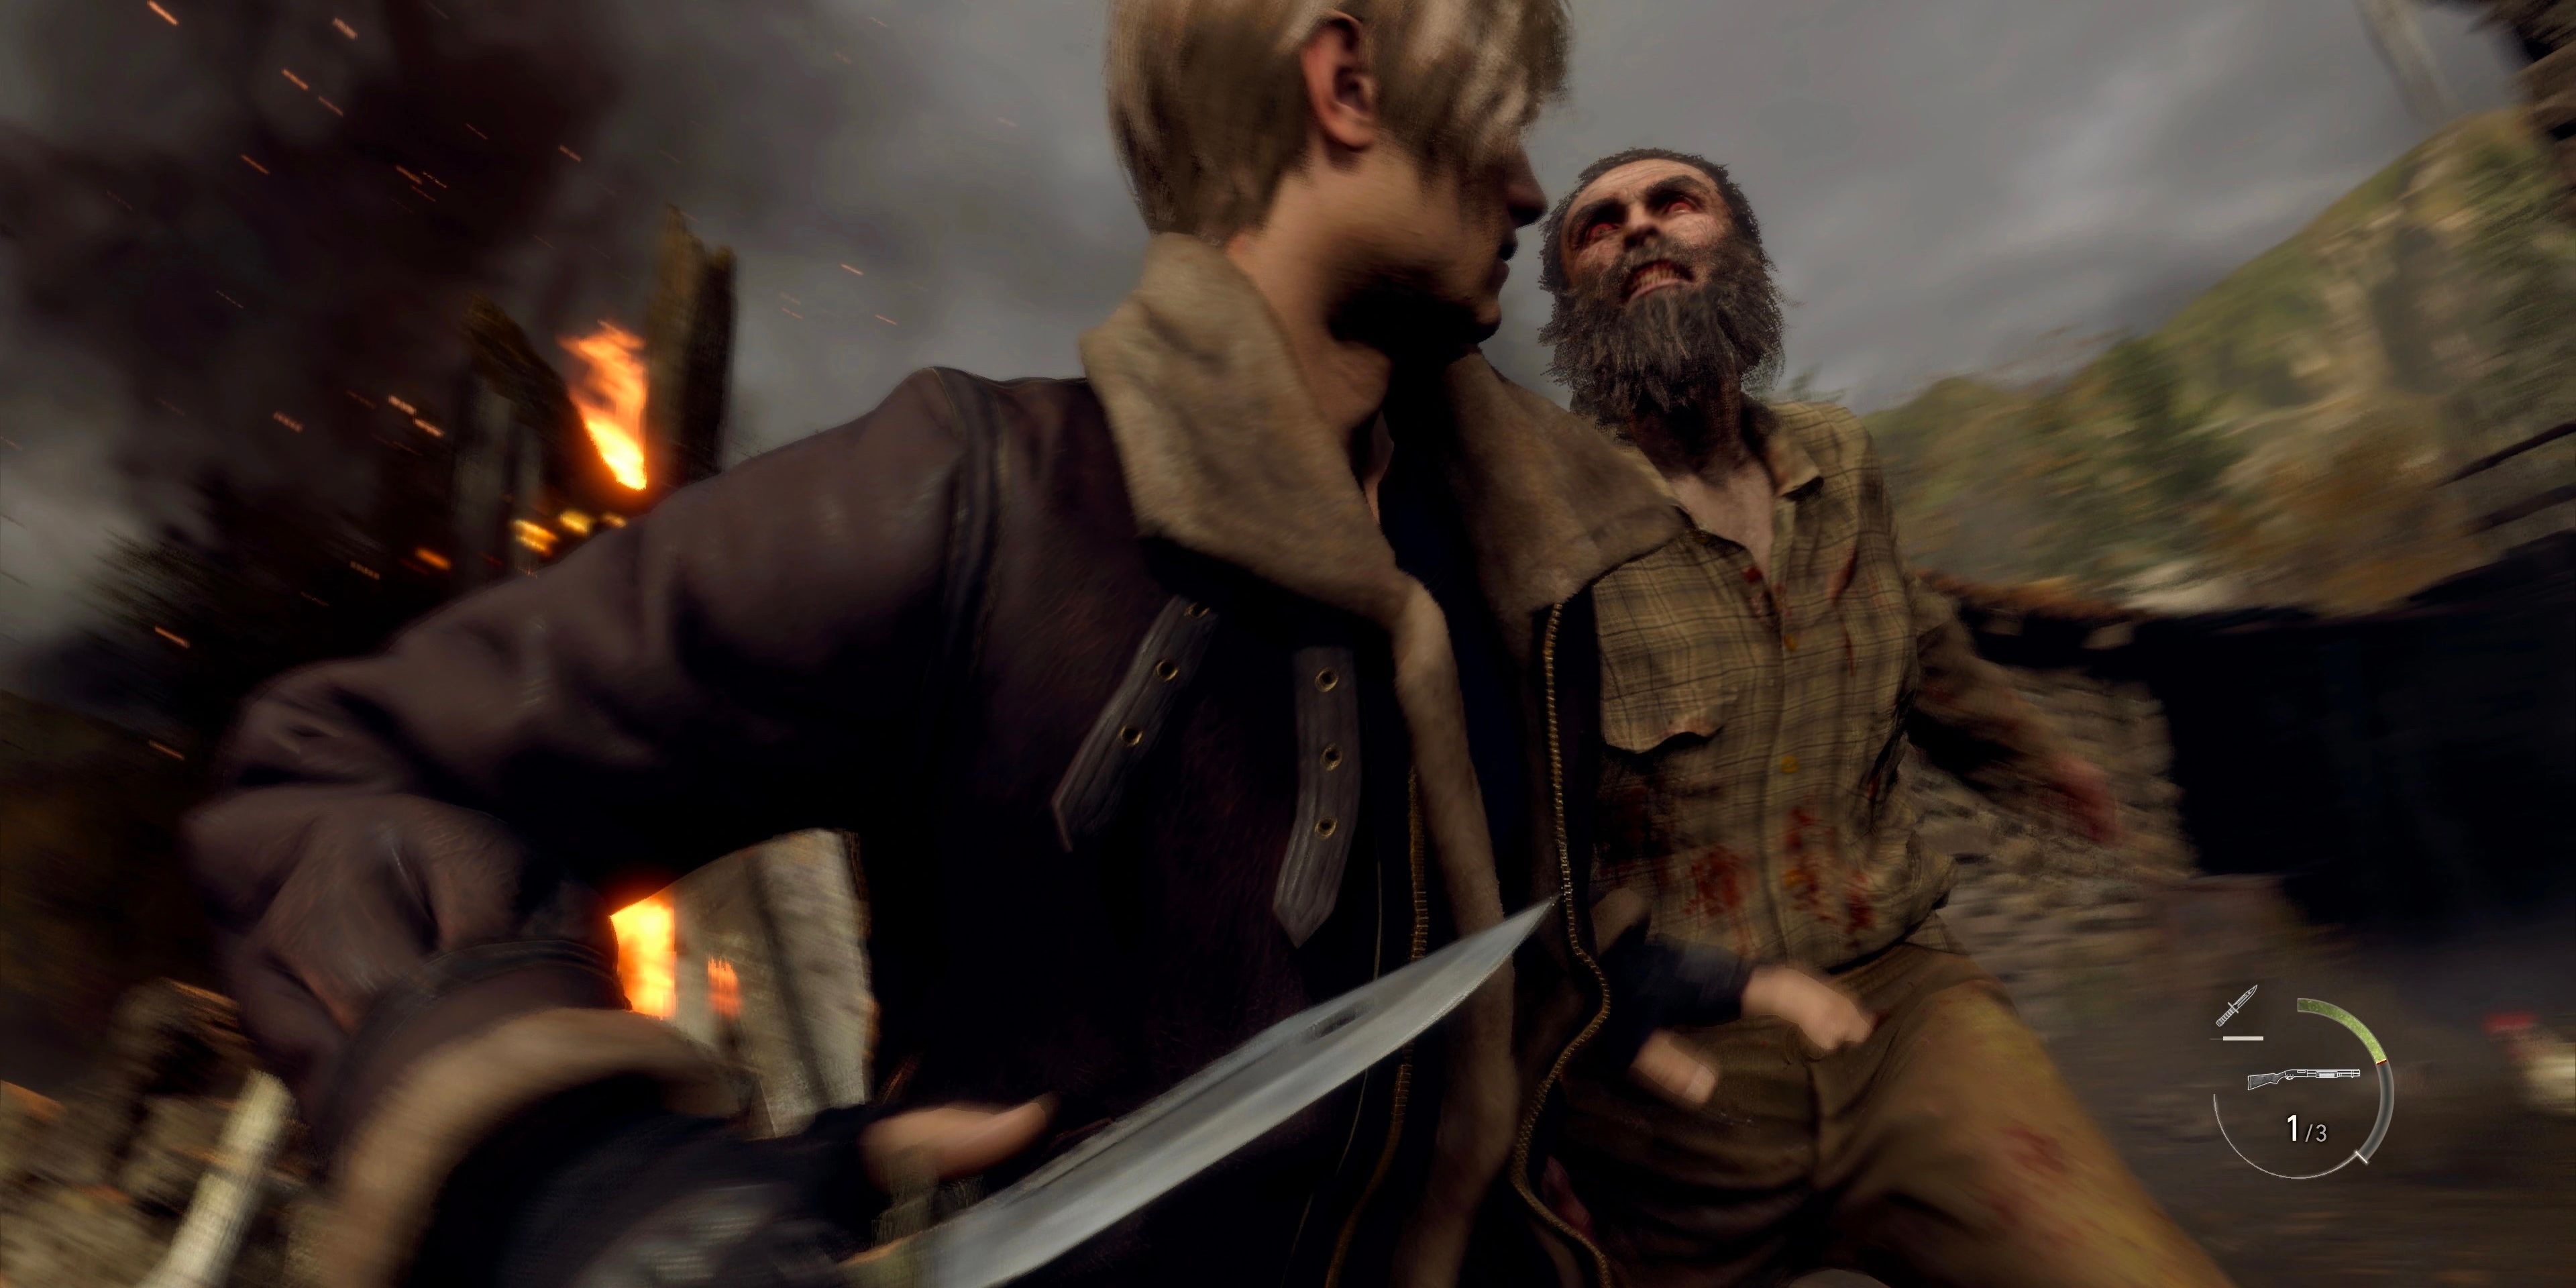 Leon attacks a villager with the combat knife in Resident Evil 4 remake